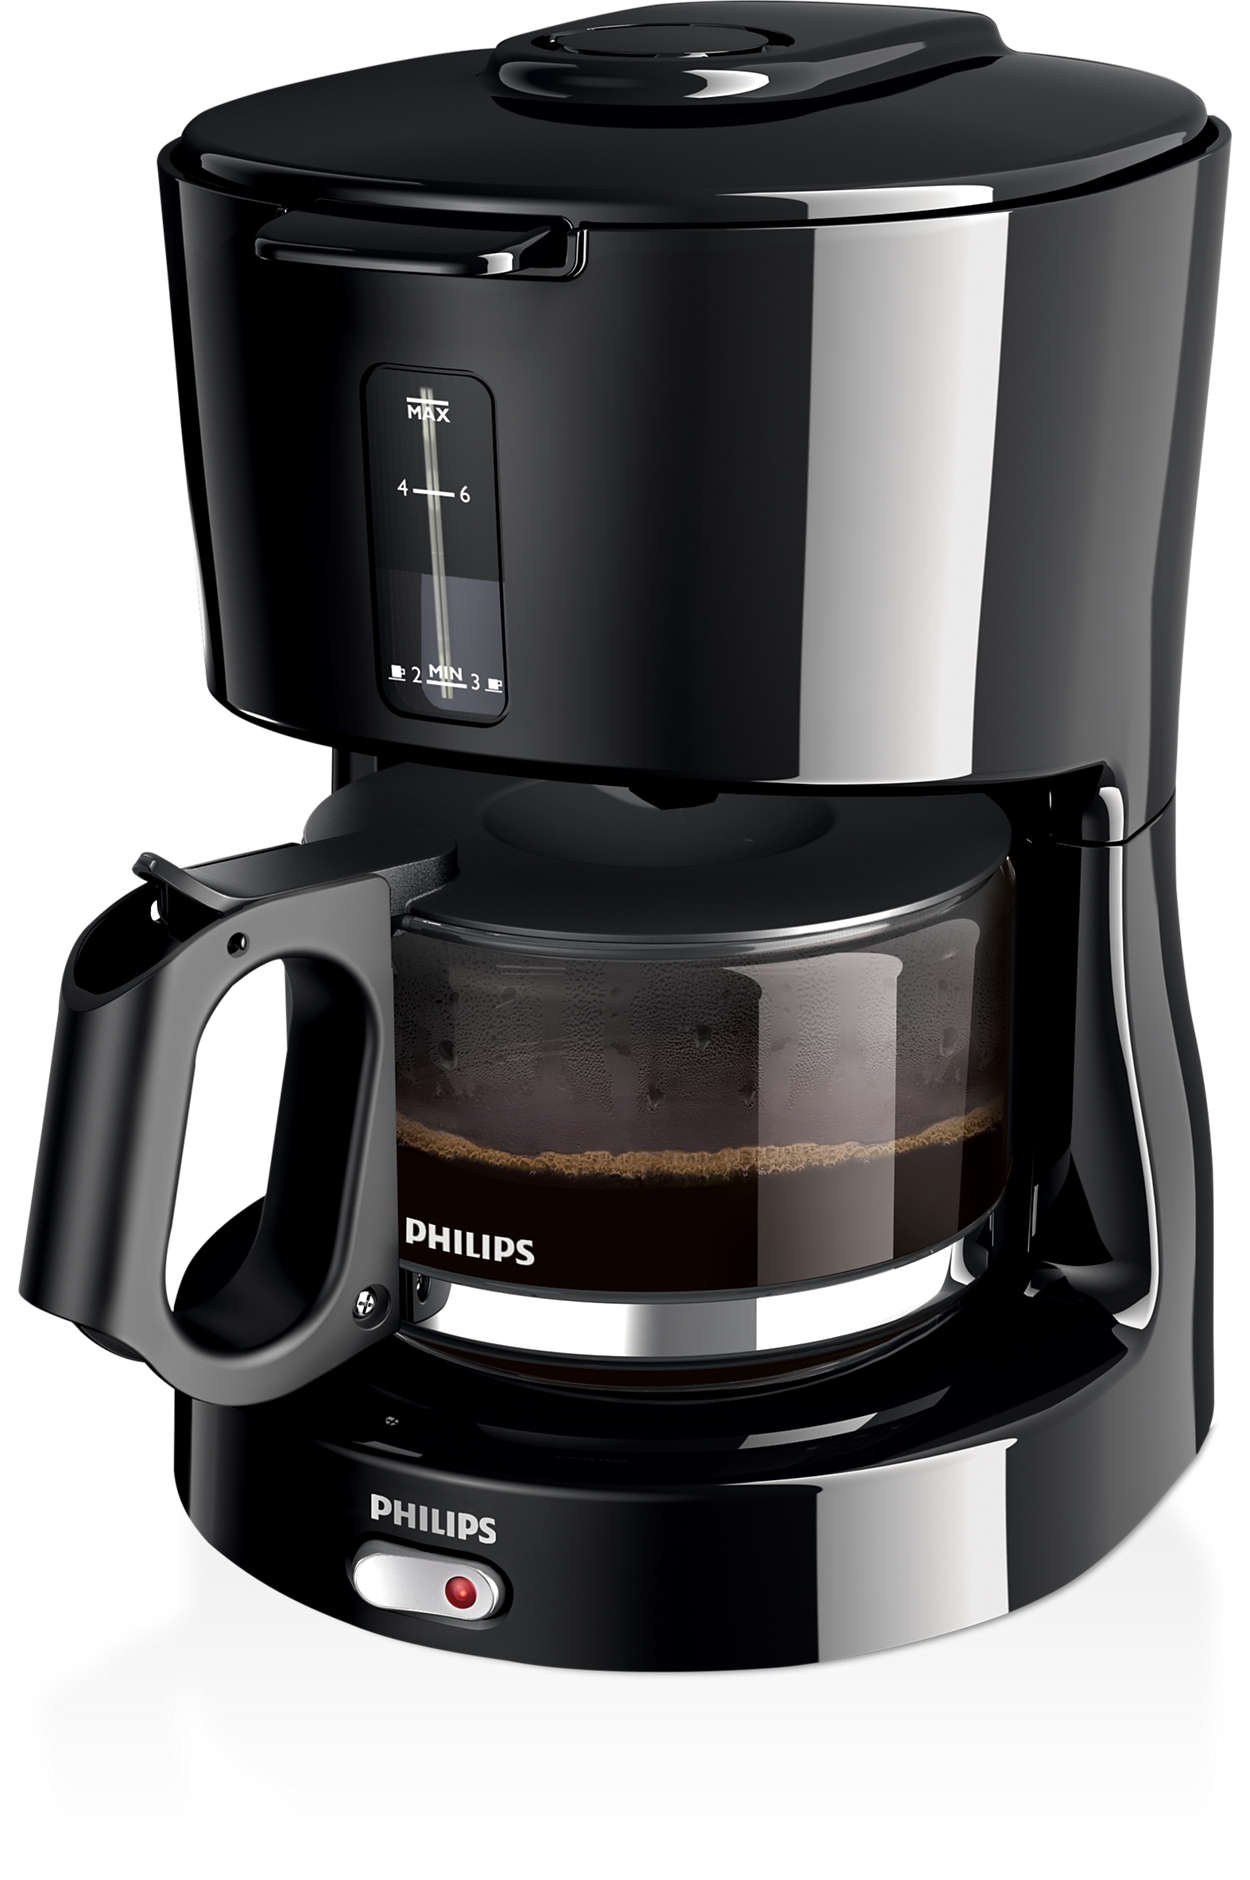 Father’s Day Gifts - Coffee Maker